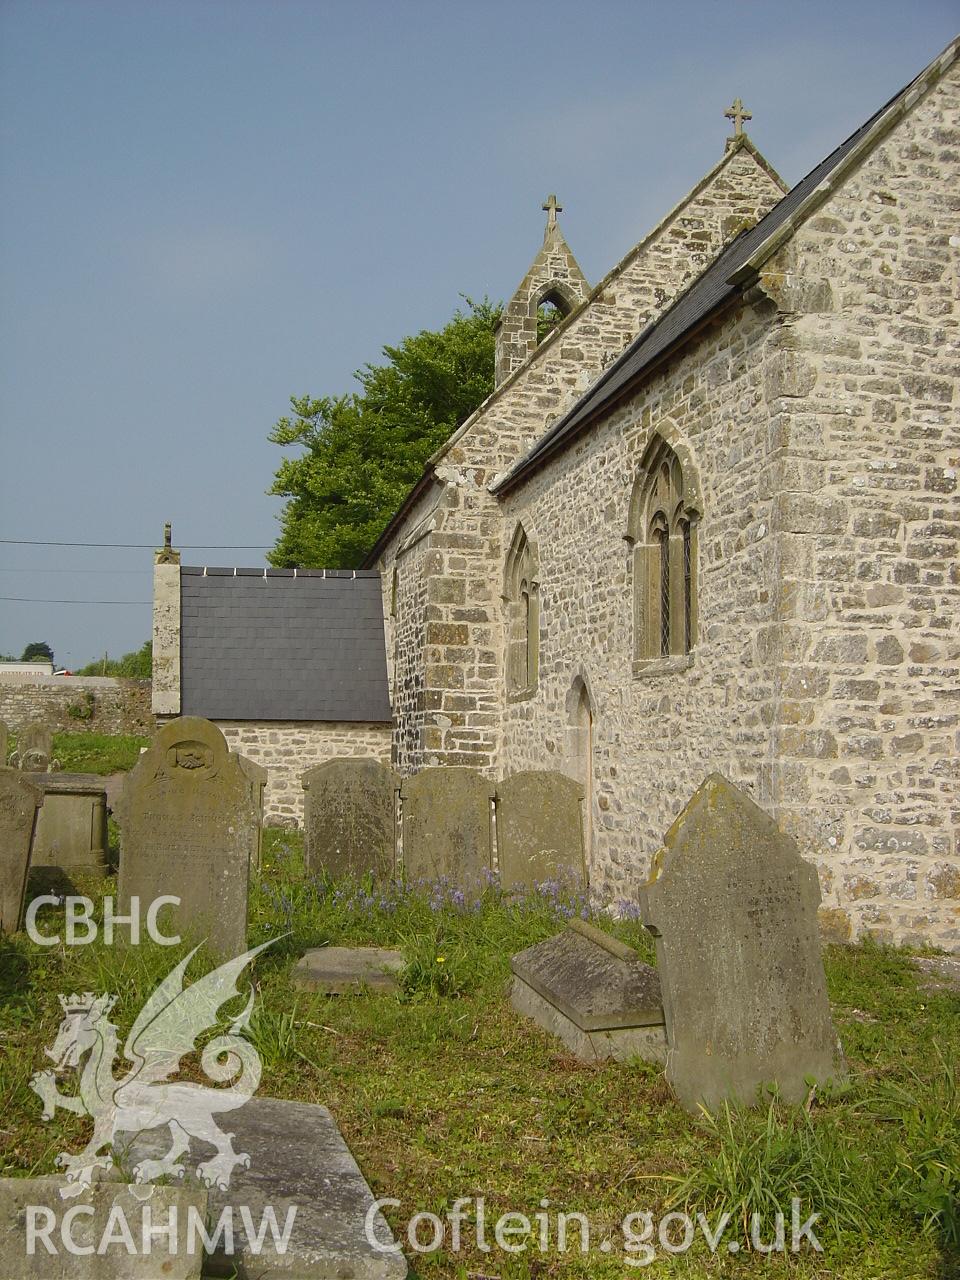 General exterior view at Tythegston Church, taken by Care Design, April 2010.